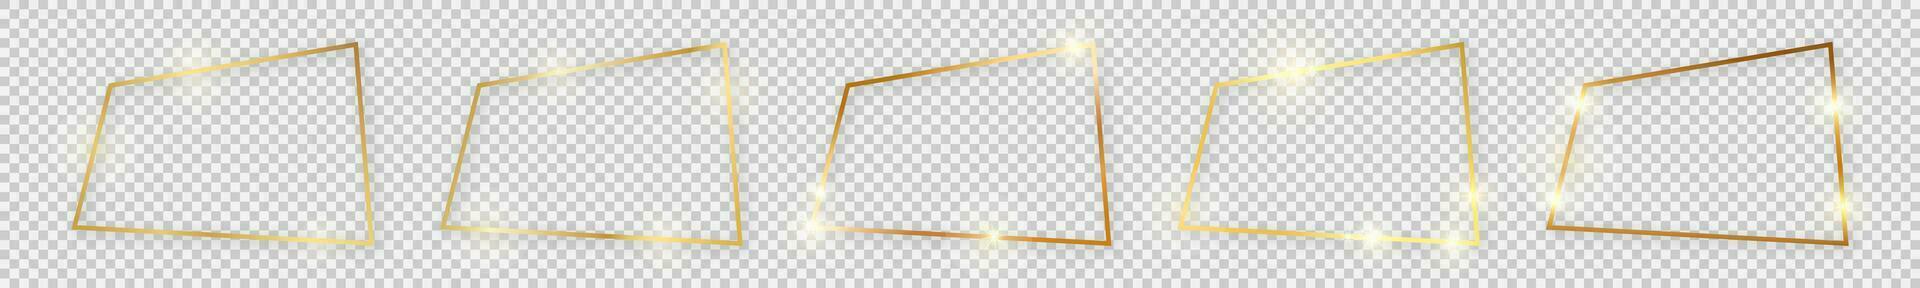 Set of five gold shiny rectangular frames with glowing effects and shadows on background. Vector illustration